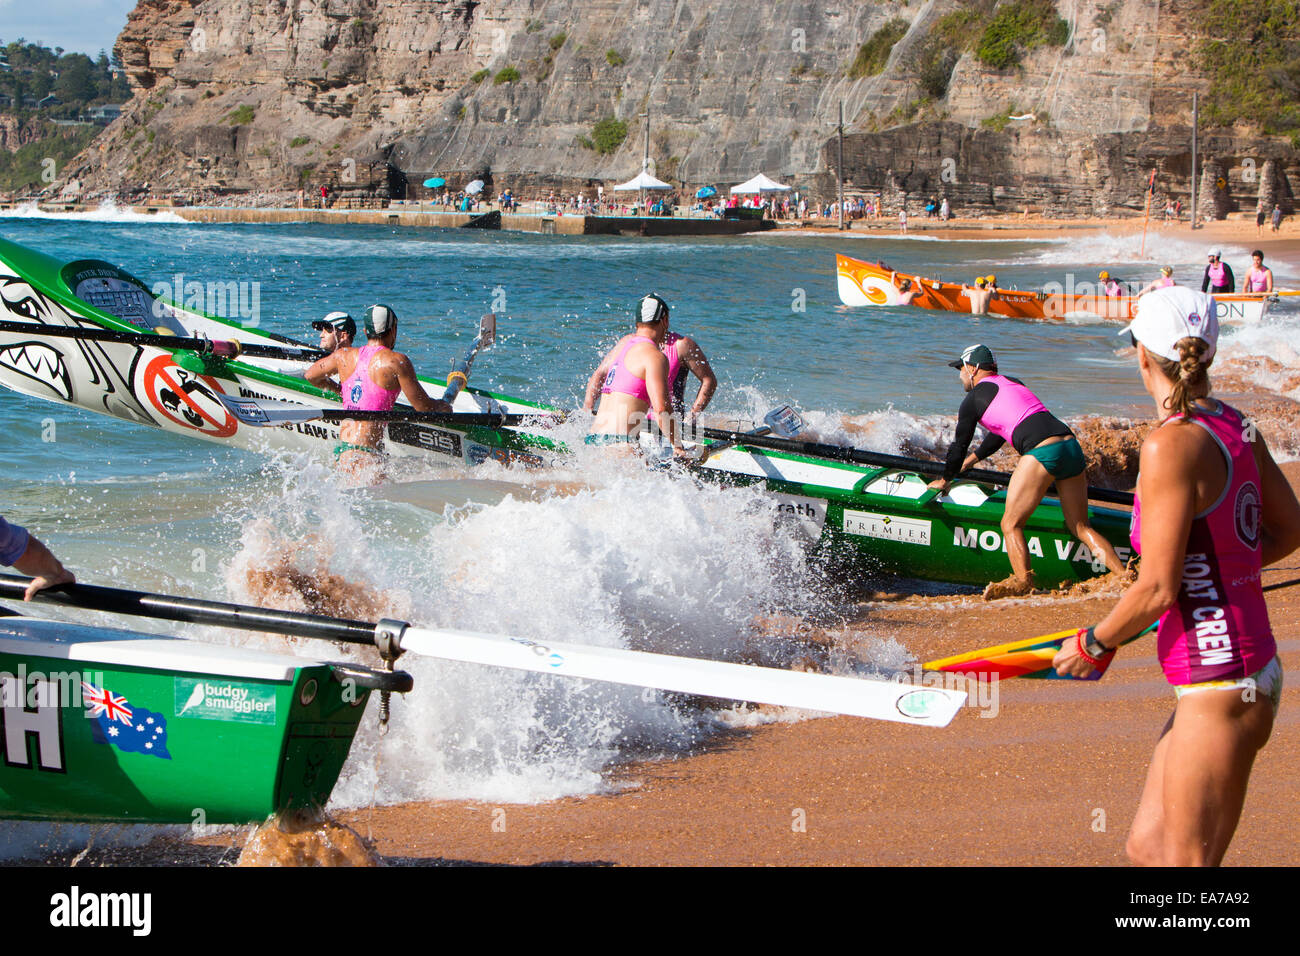 Sydney, Australia. 8th Nov, 2014. Summer surfboat racing competition amongst surfclubs located on Sydney's northern beaches begins at Bilgola Beach pictured launch of surfboat  NSW Australia Credit:  martin berry/Alamy Live News Stock Photo